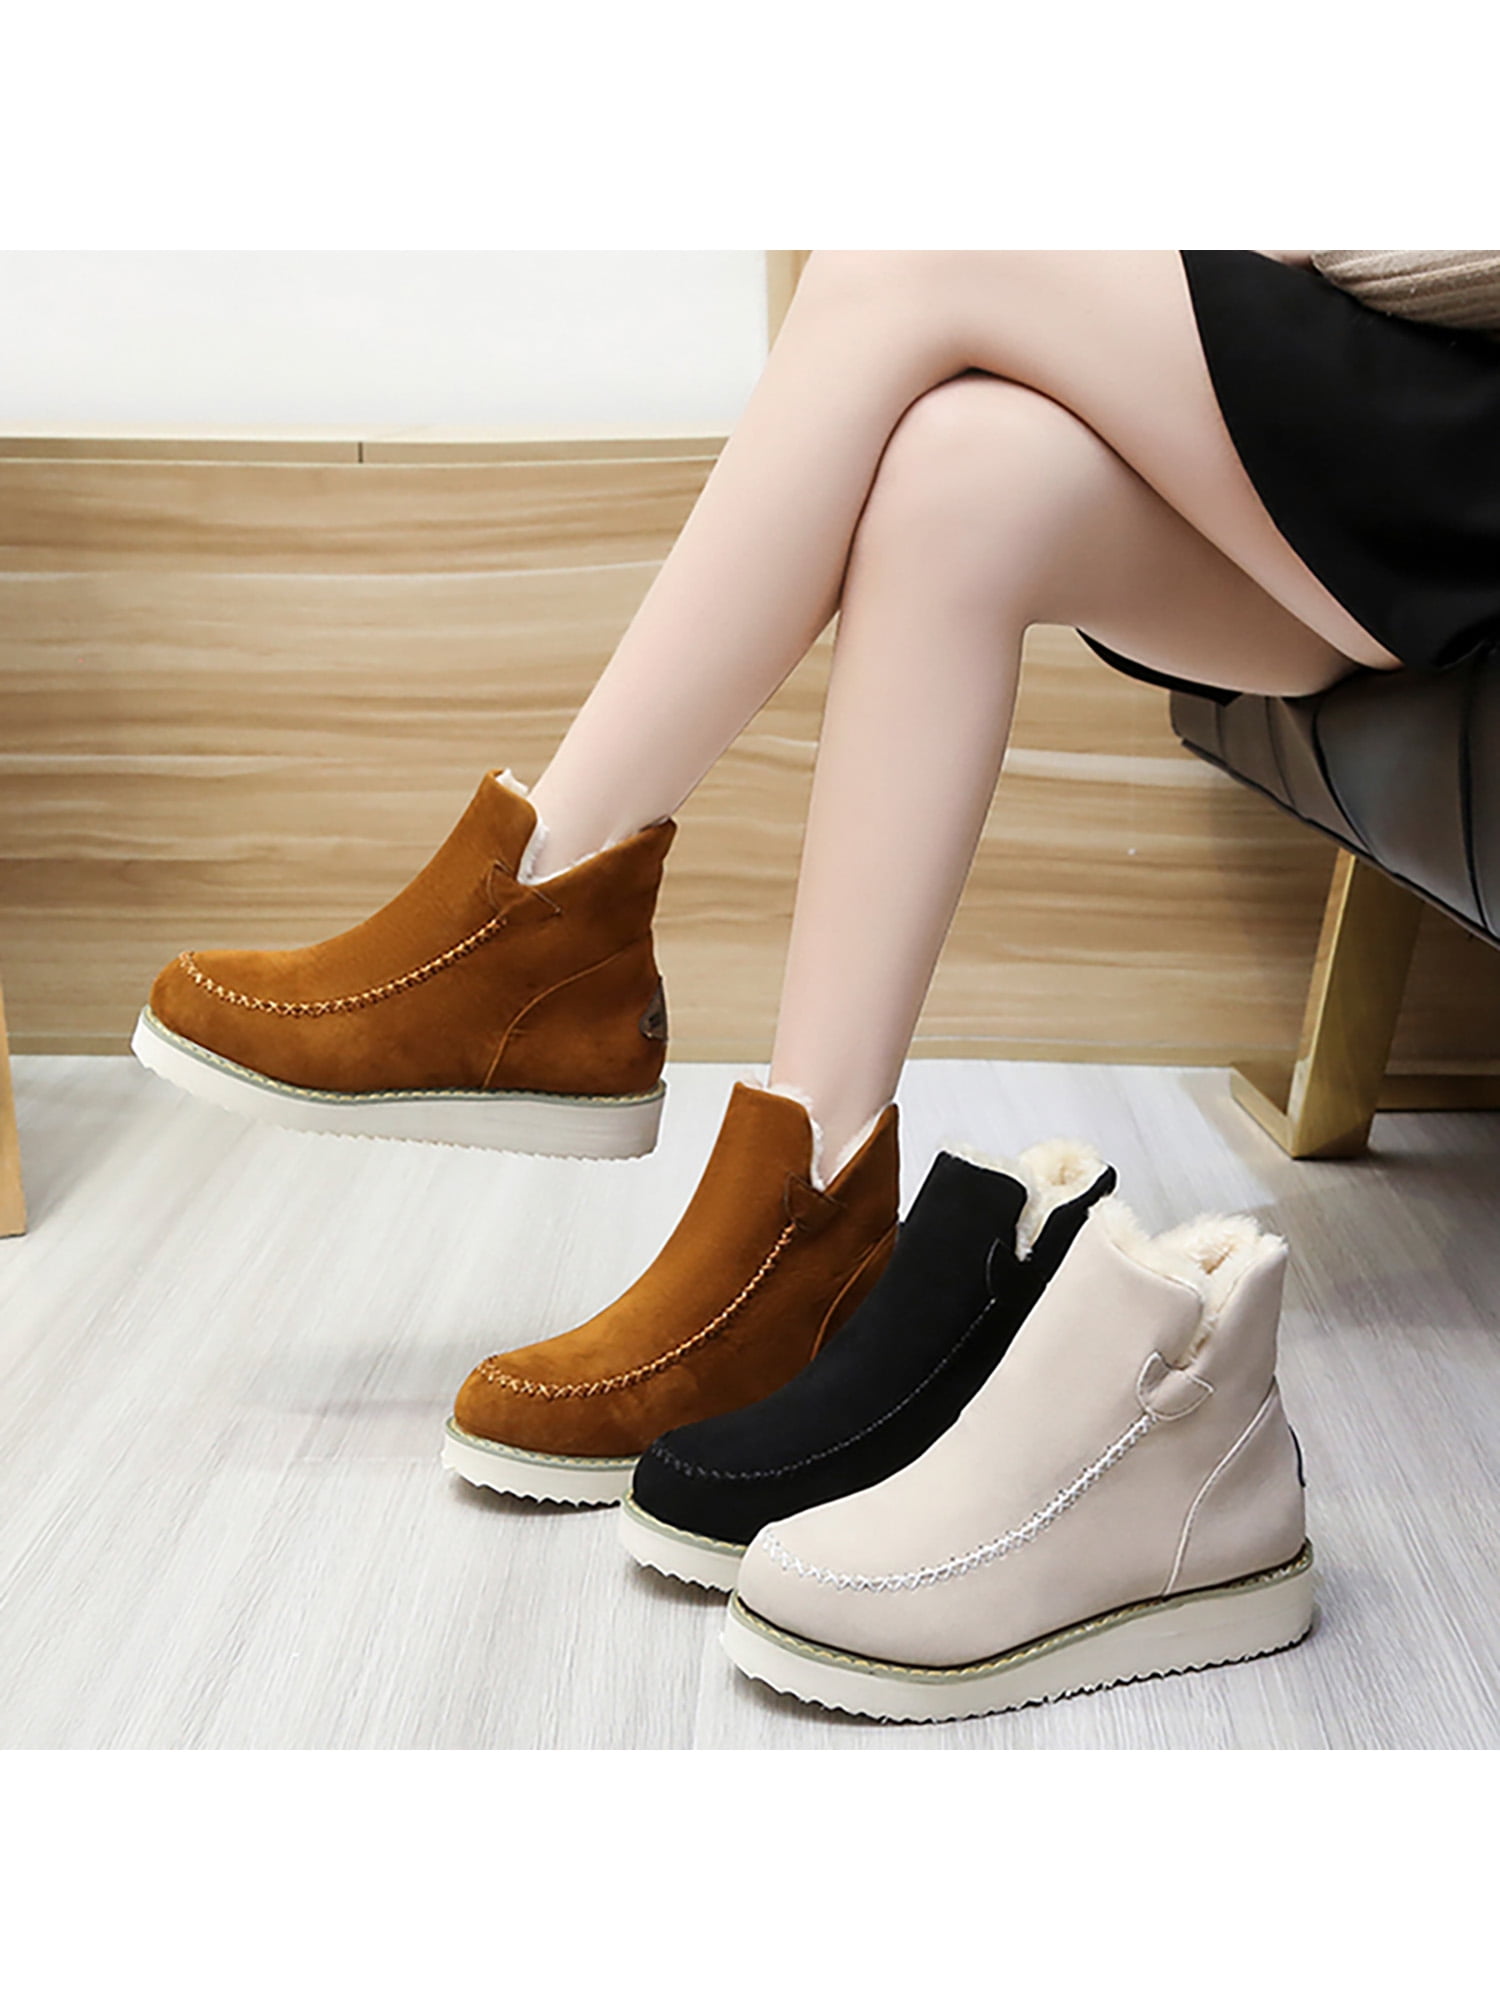 Retro Women Slip-On Ankle Boots Low Heel Casual Shoes Combat Motorcycle Booties 